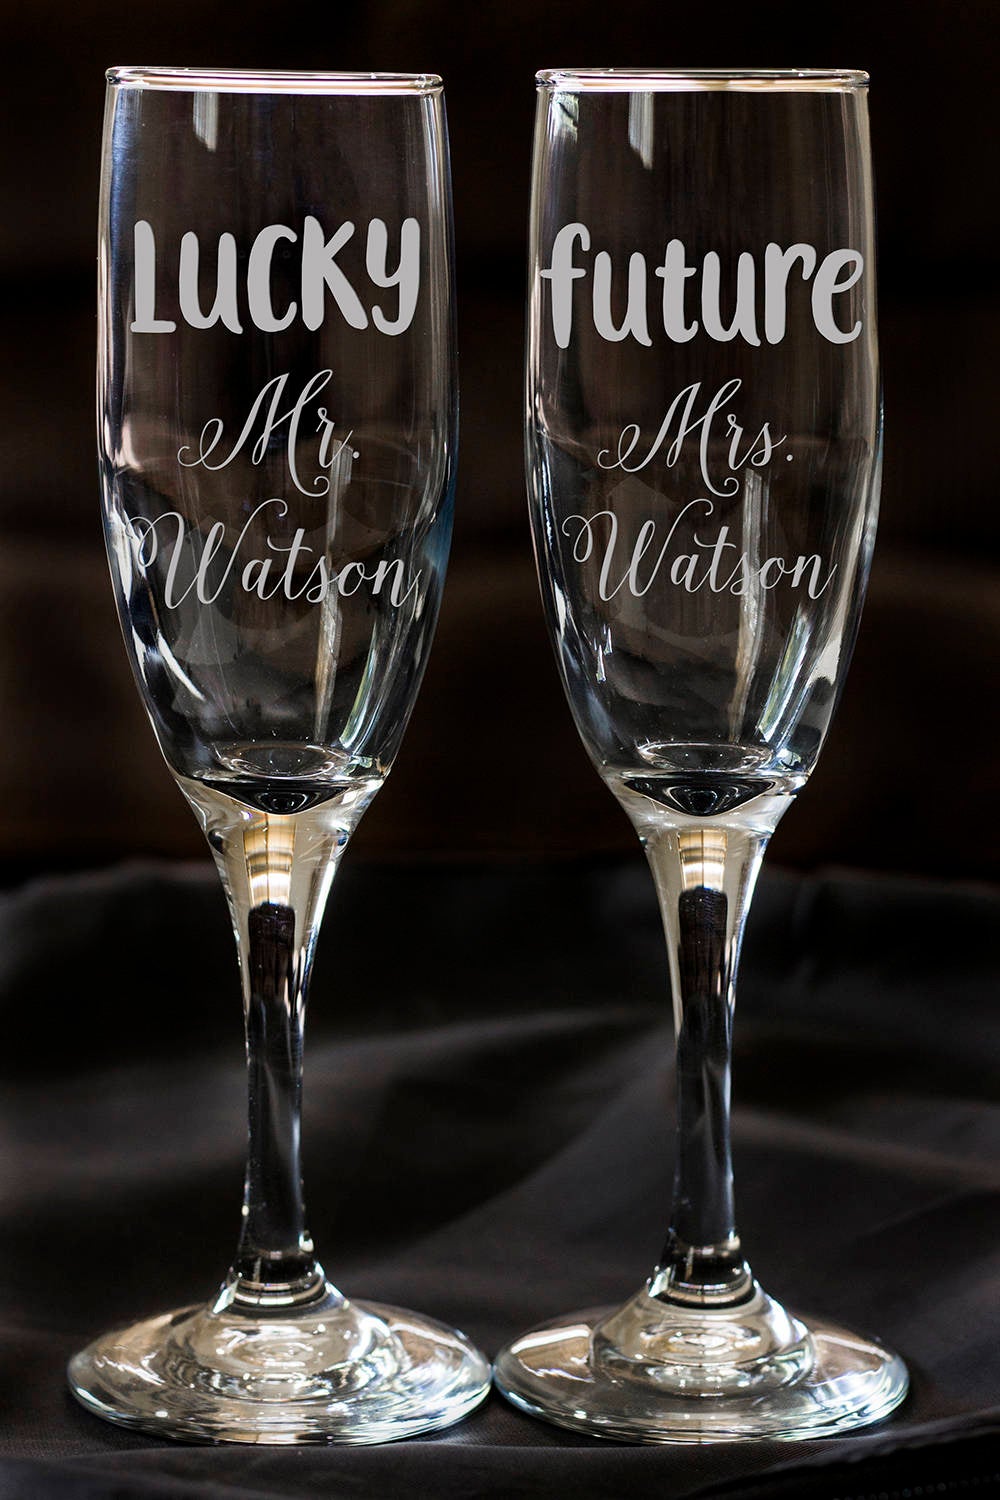 Set of 2 champagne flues, personalized names wedding toasts, Engraved Champagne Flute, Engraved Wedding Champagne Glasses,Custom,Engraved.